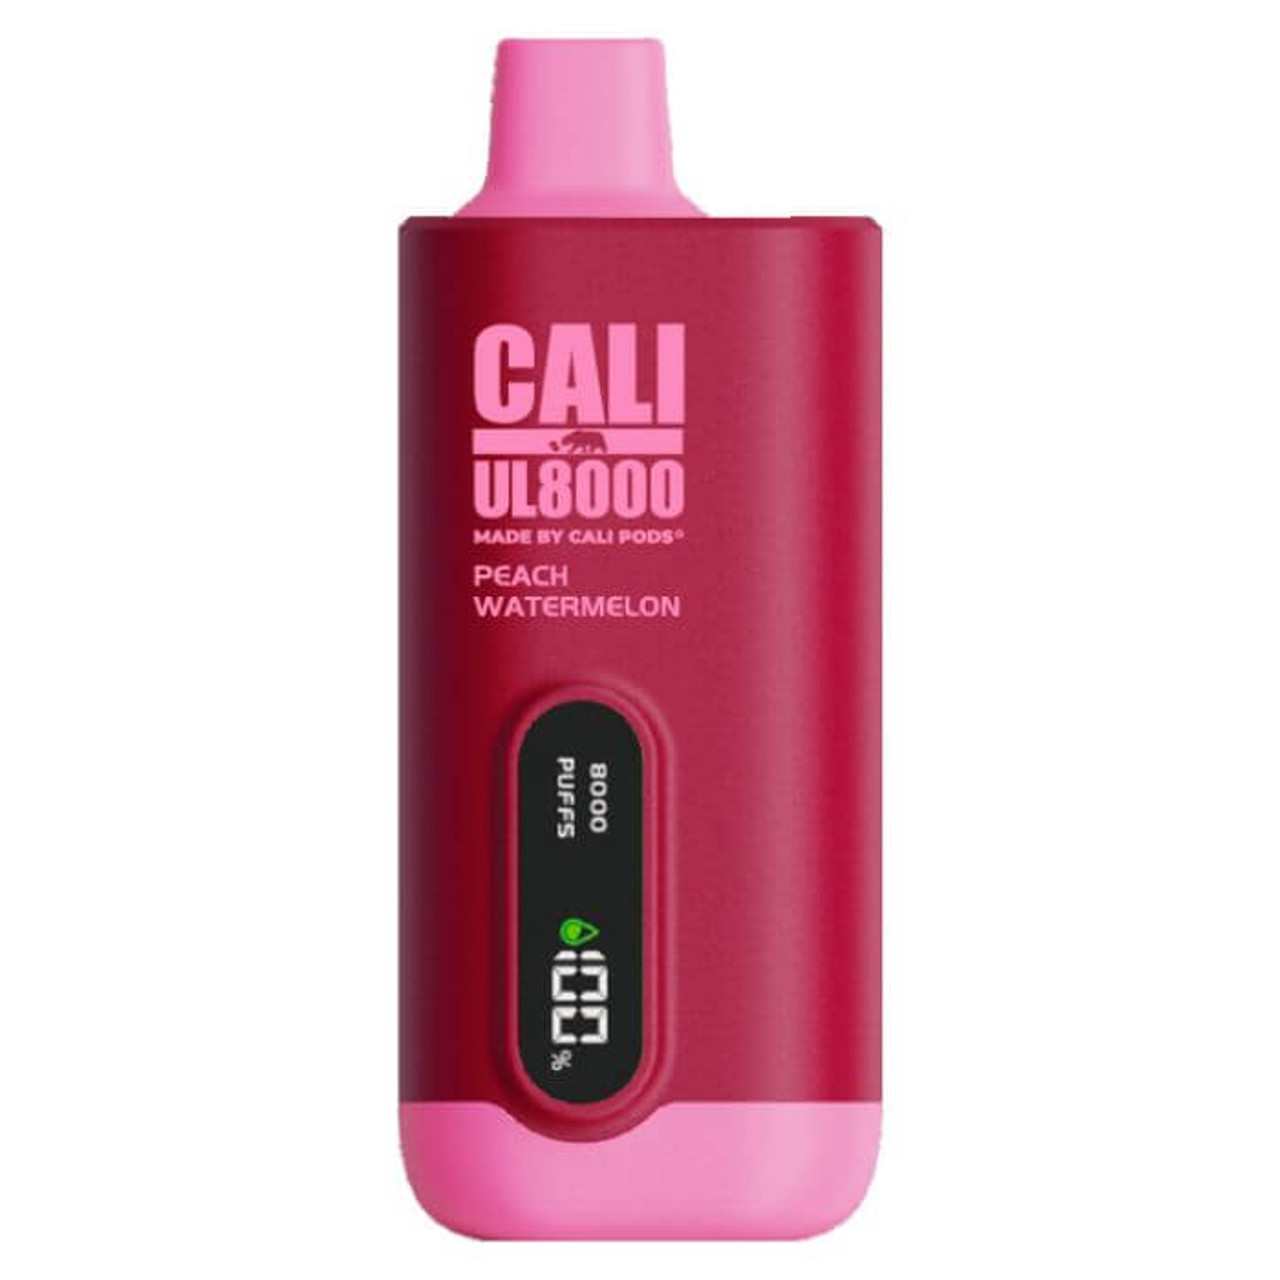 CALI UL8000 5% NIC RECHARGEABLE DISPOSABLE 18ML 8000 PUFFS - 6CT